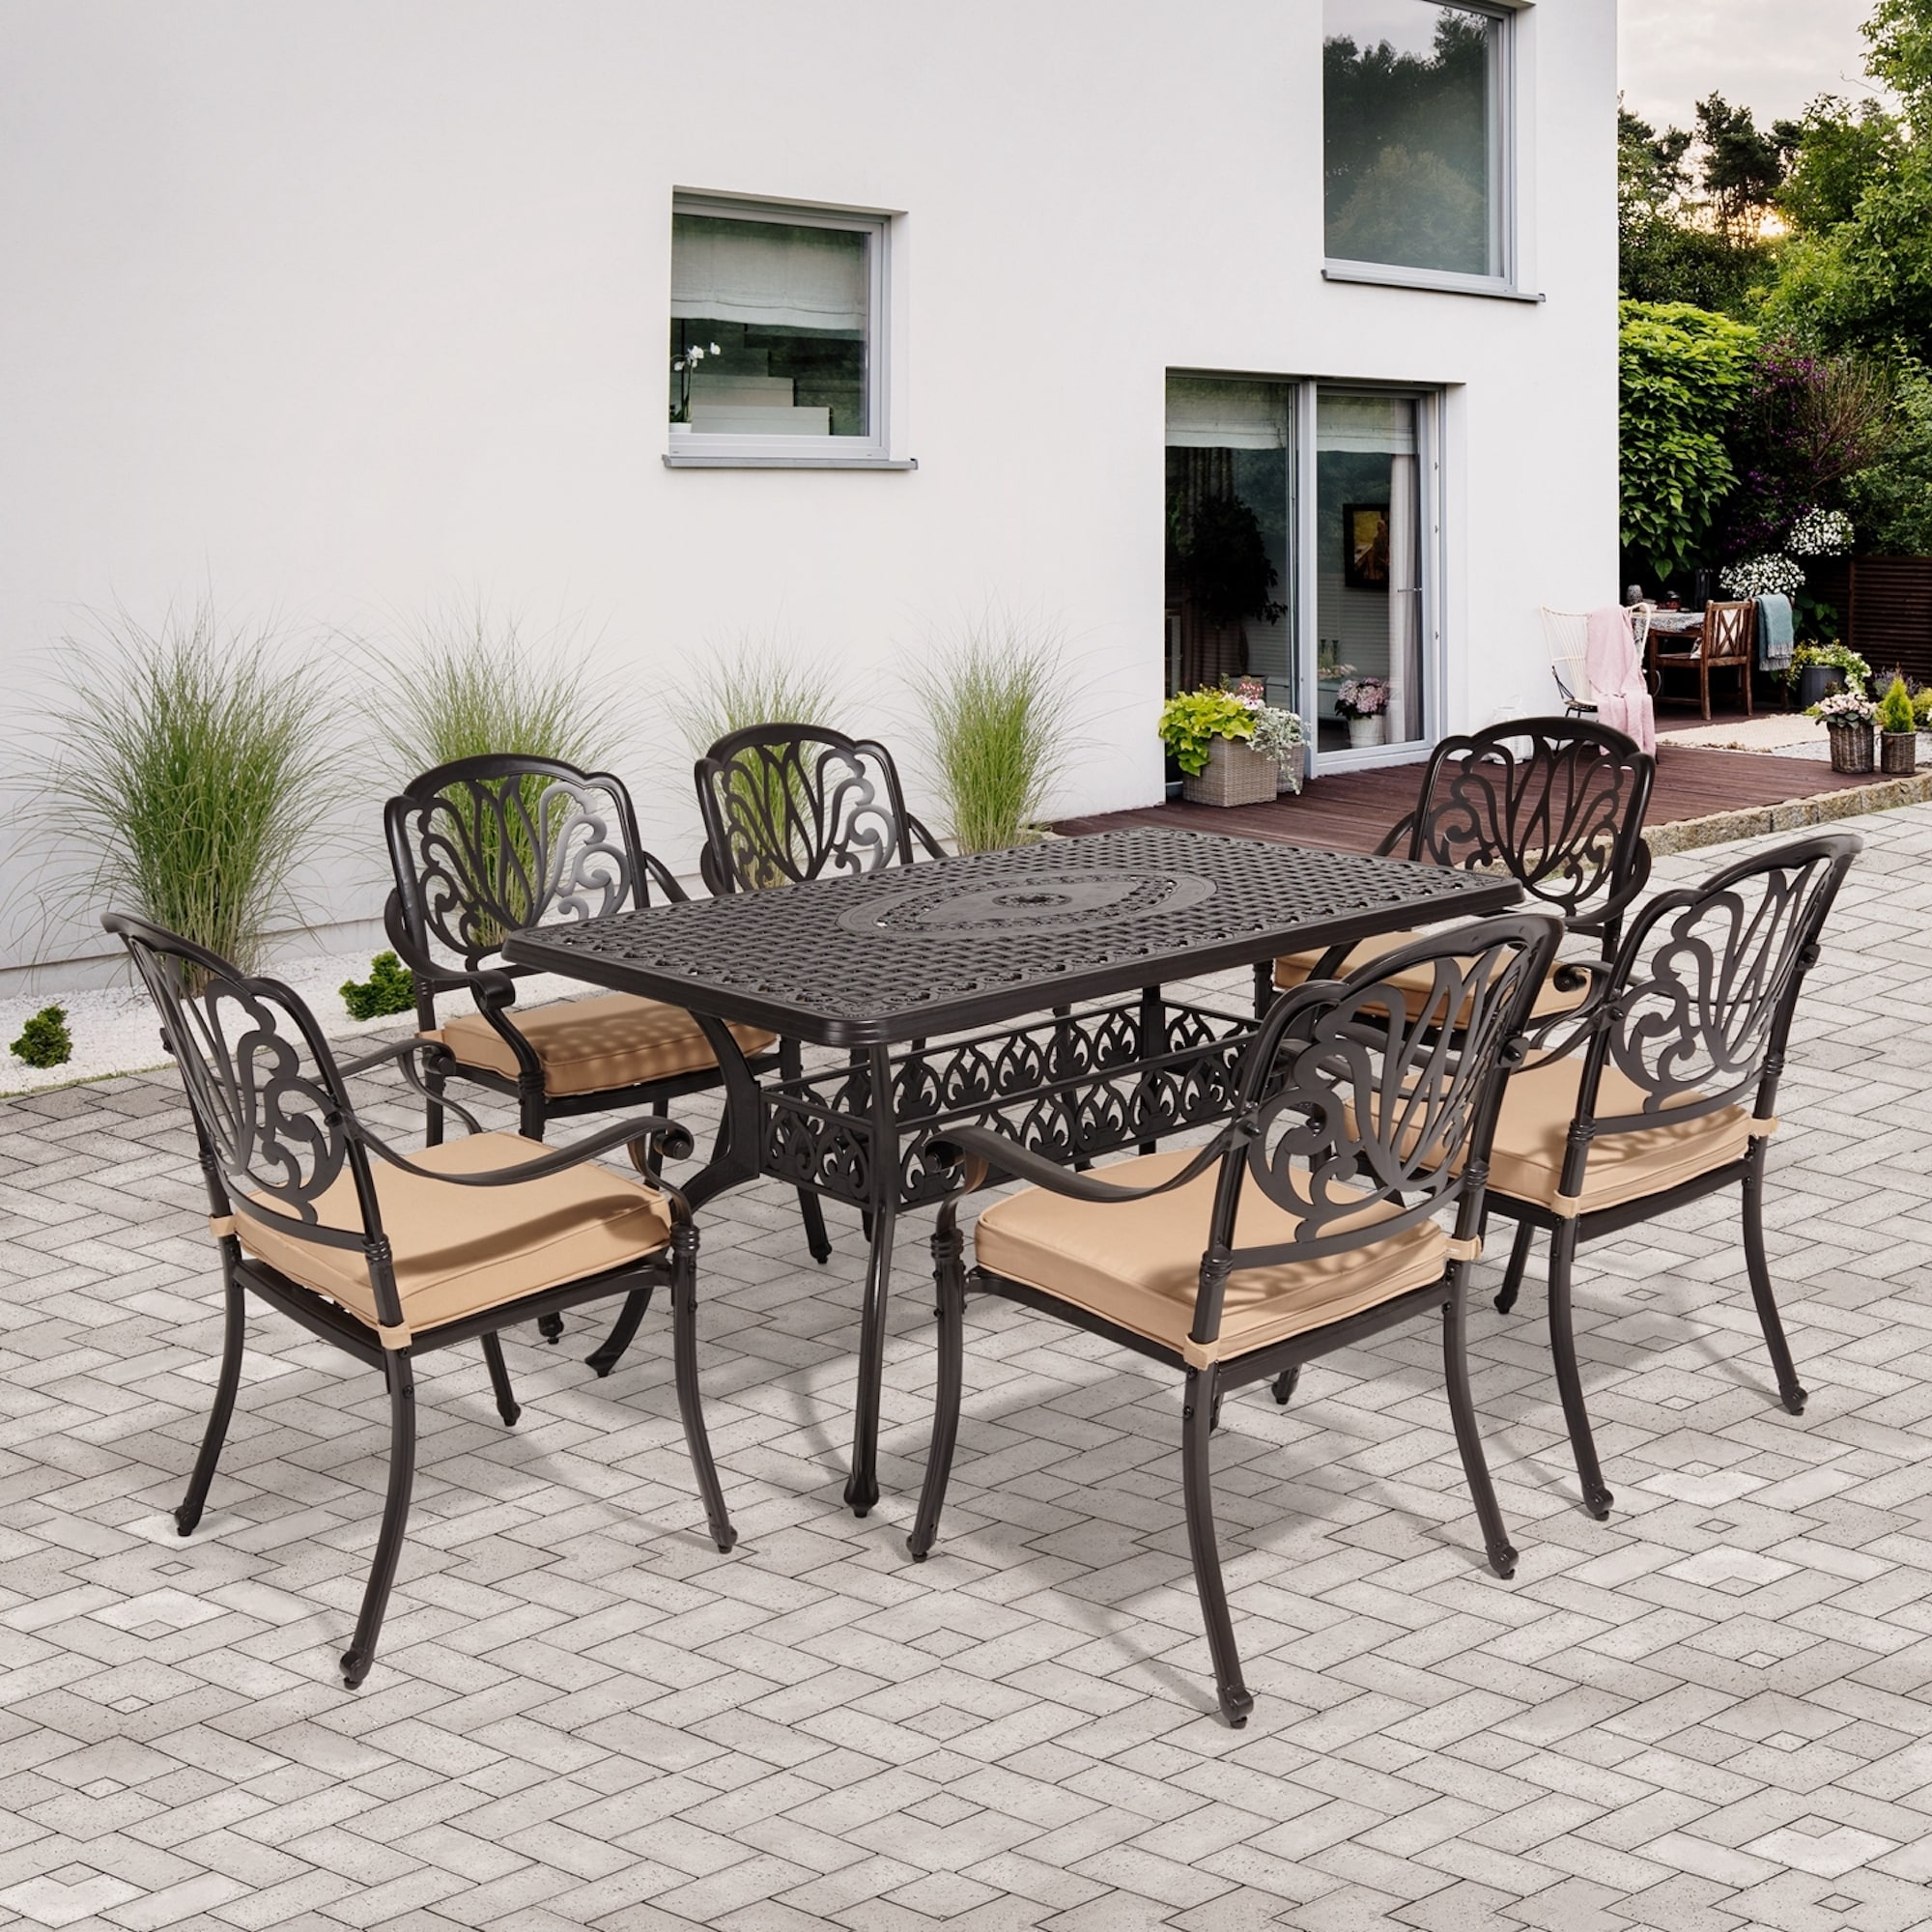 All-Weather Cast Aluminum Outdoor Conversation Set VIVIJASON 7-Piece Patio Furniture Dining Set Include 6 Cushioned Chairs and a Rectangle Table with Umbrella Hole for Balcony Lawn Garden Backyard 